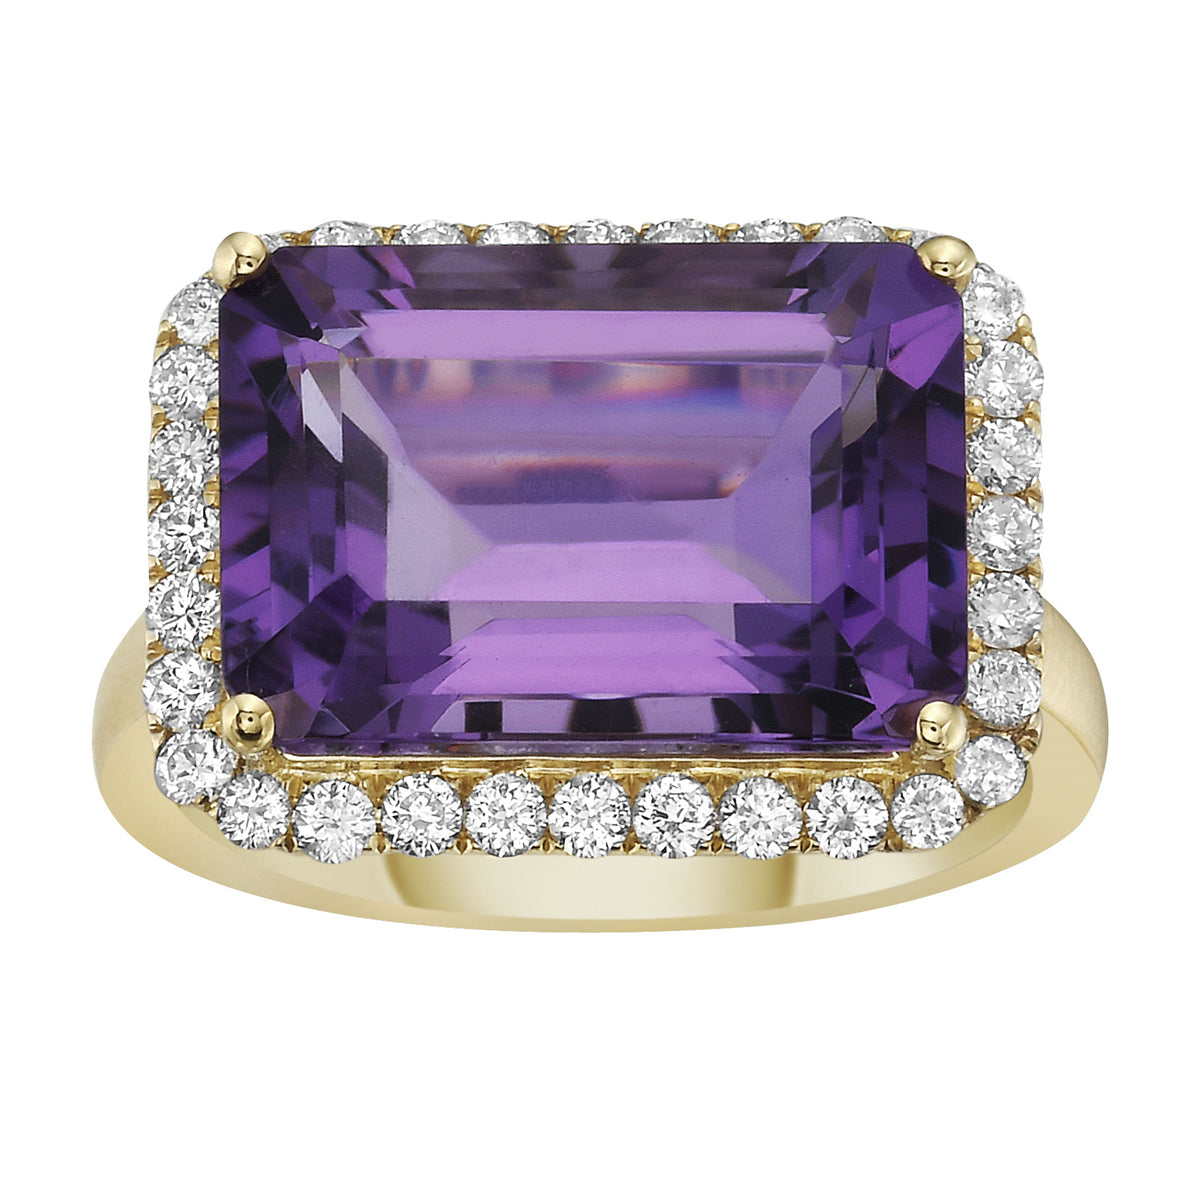 Ring 14KY/3.6G 1AME -7.22CT 32RD-0.45CT Amethyst